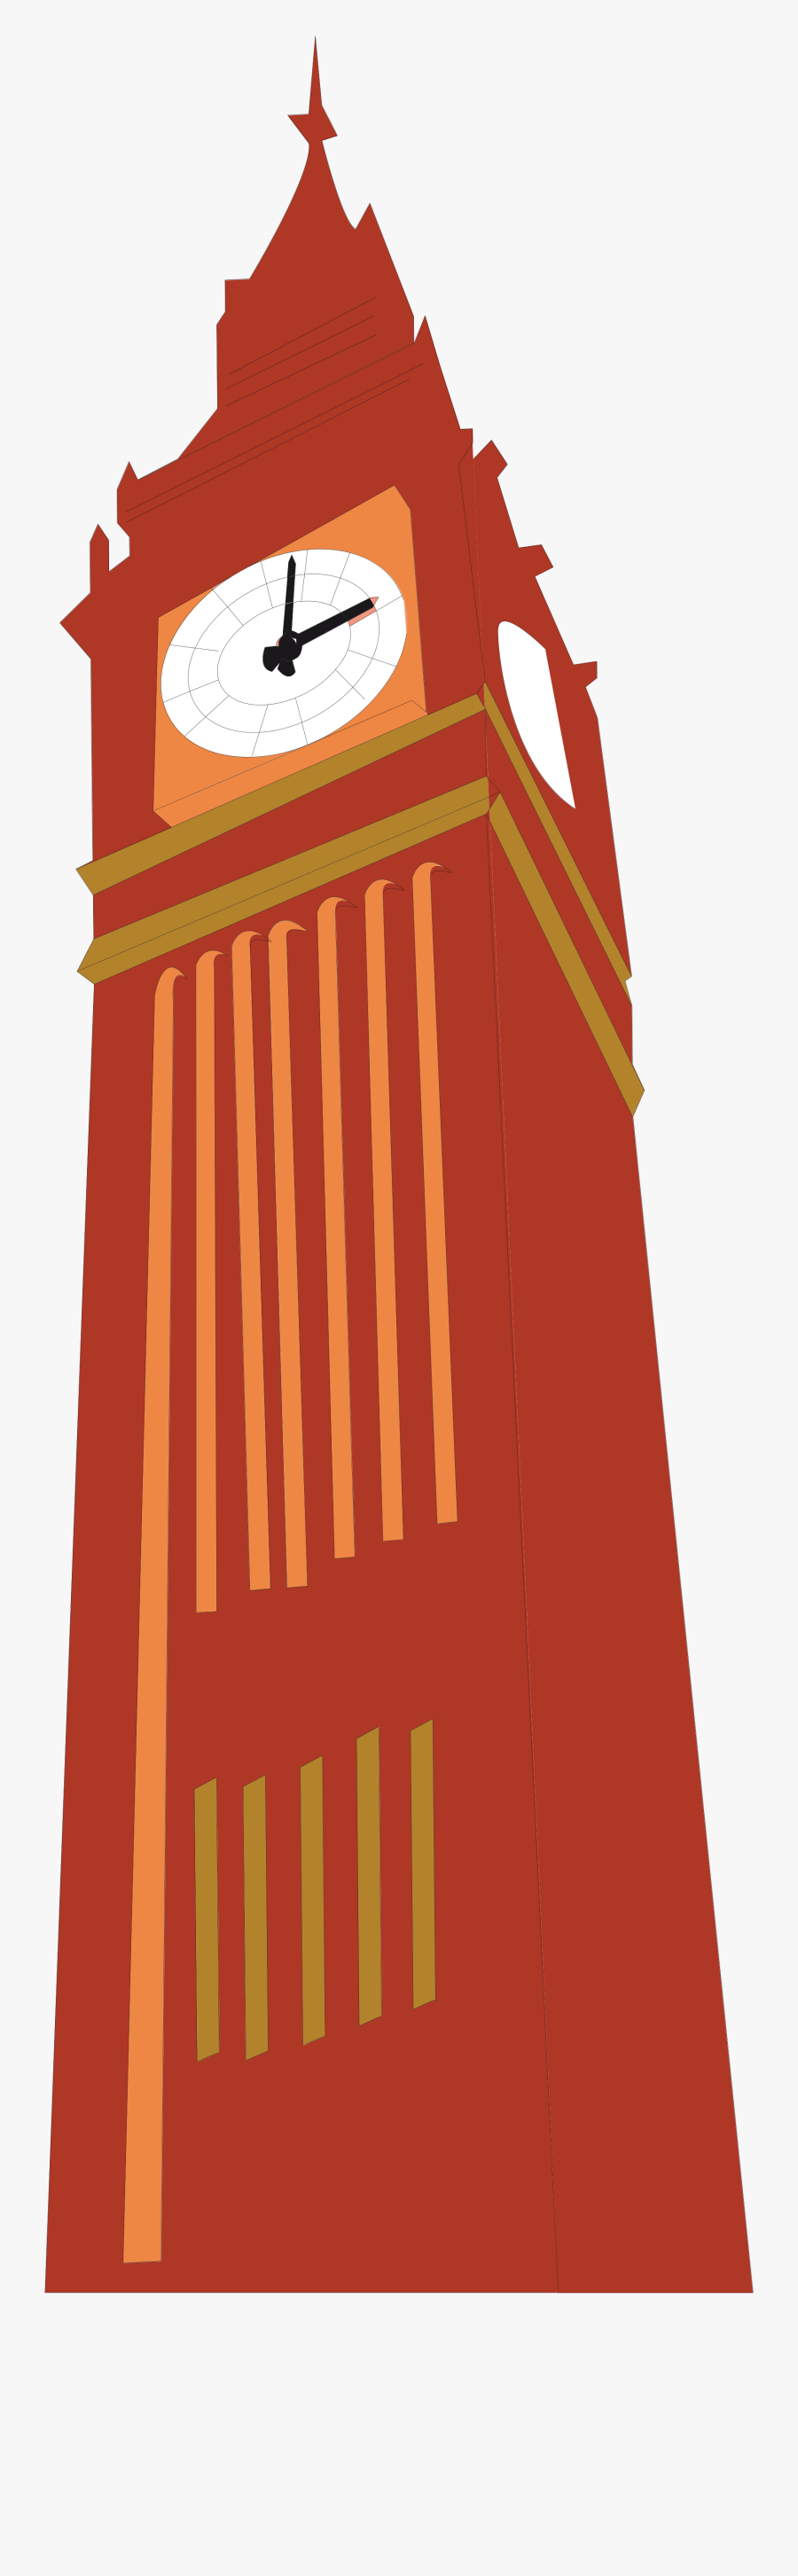 Tower - Big Ben Png Icon, Transparent Clipart